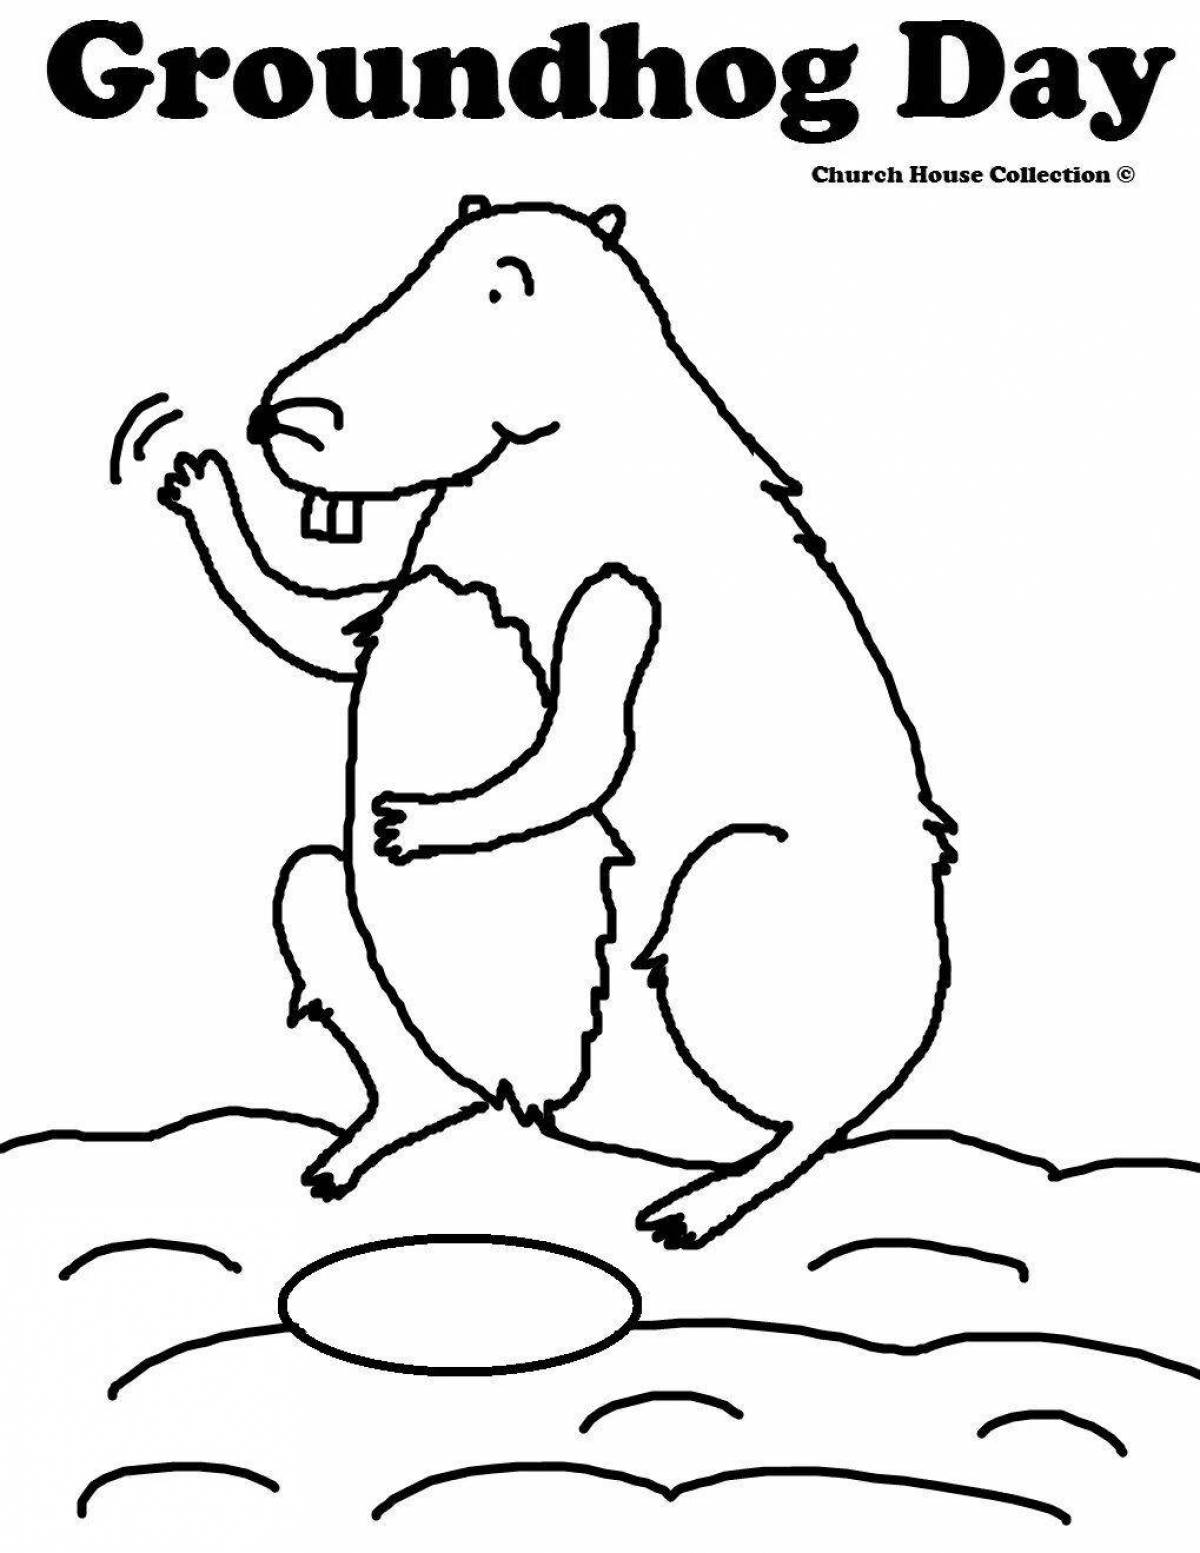 Exciting groundhog day coloring book